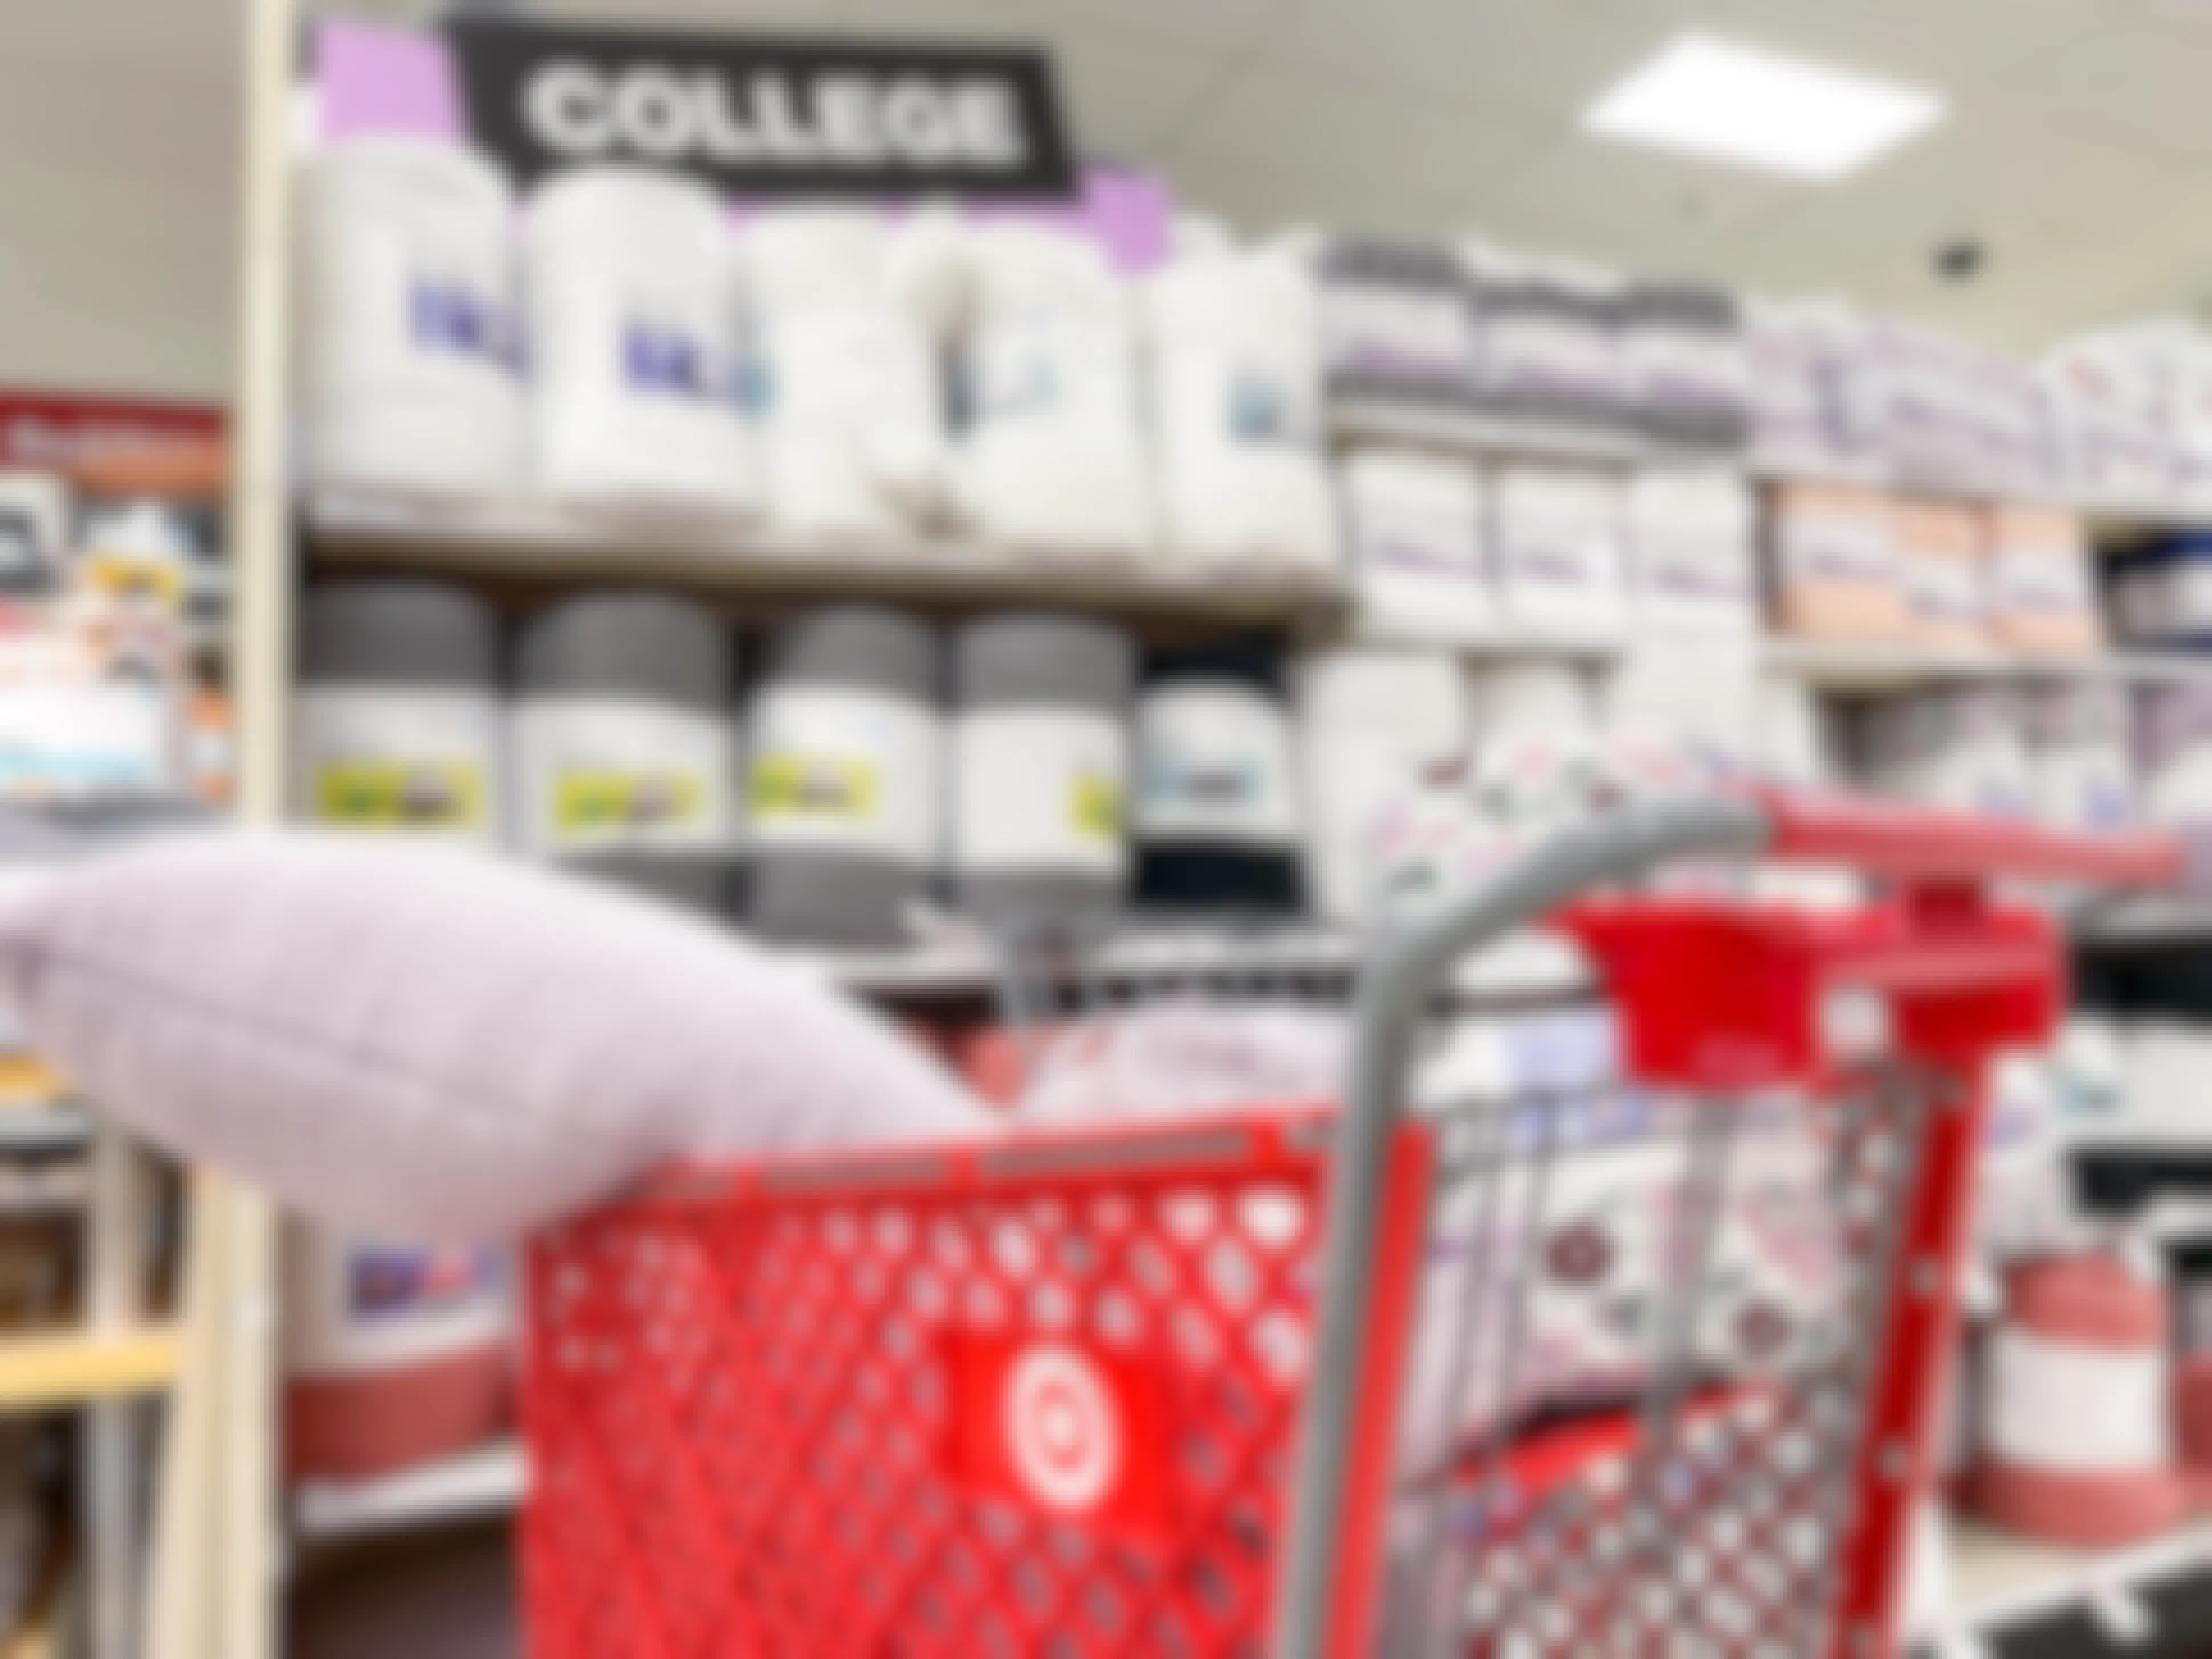 A Target shopping cart filled with bedding items parked in front of a shelf in the College Shop section in Target.